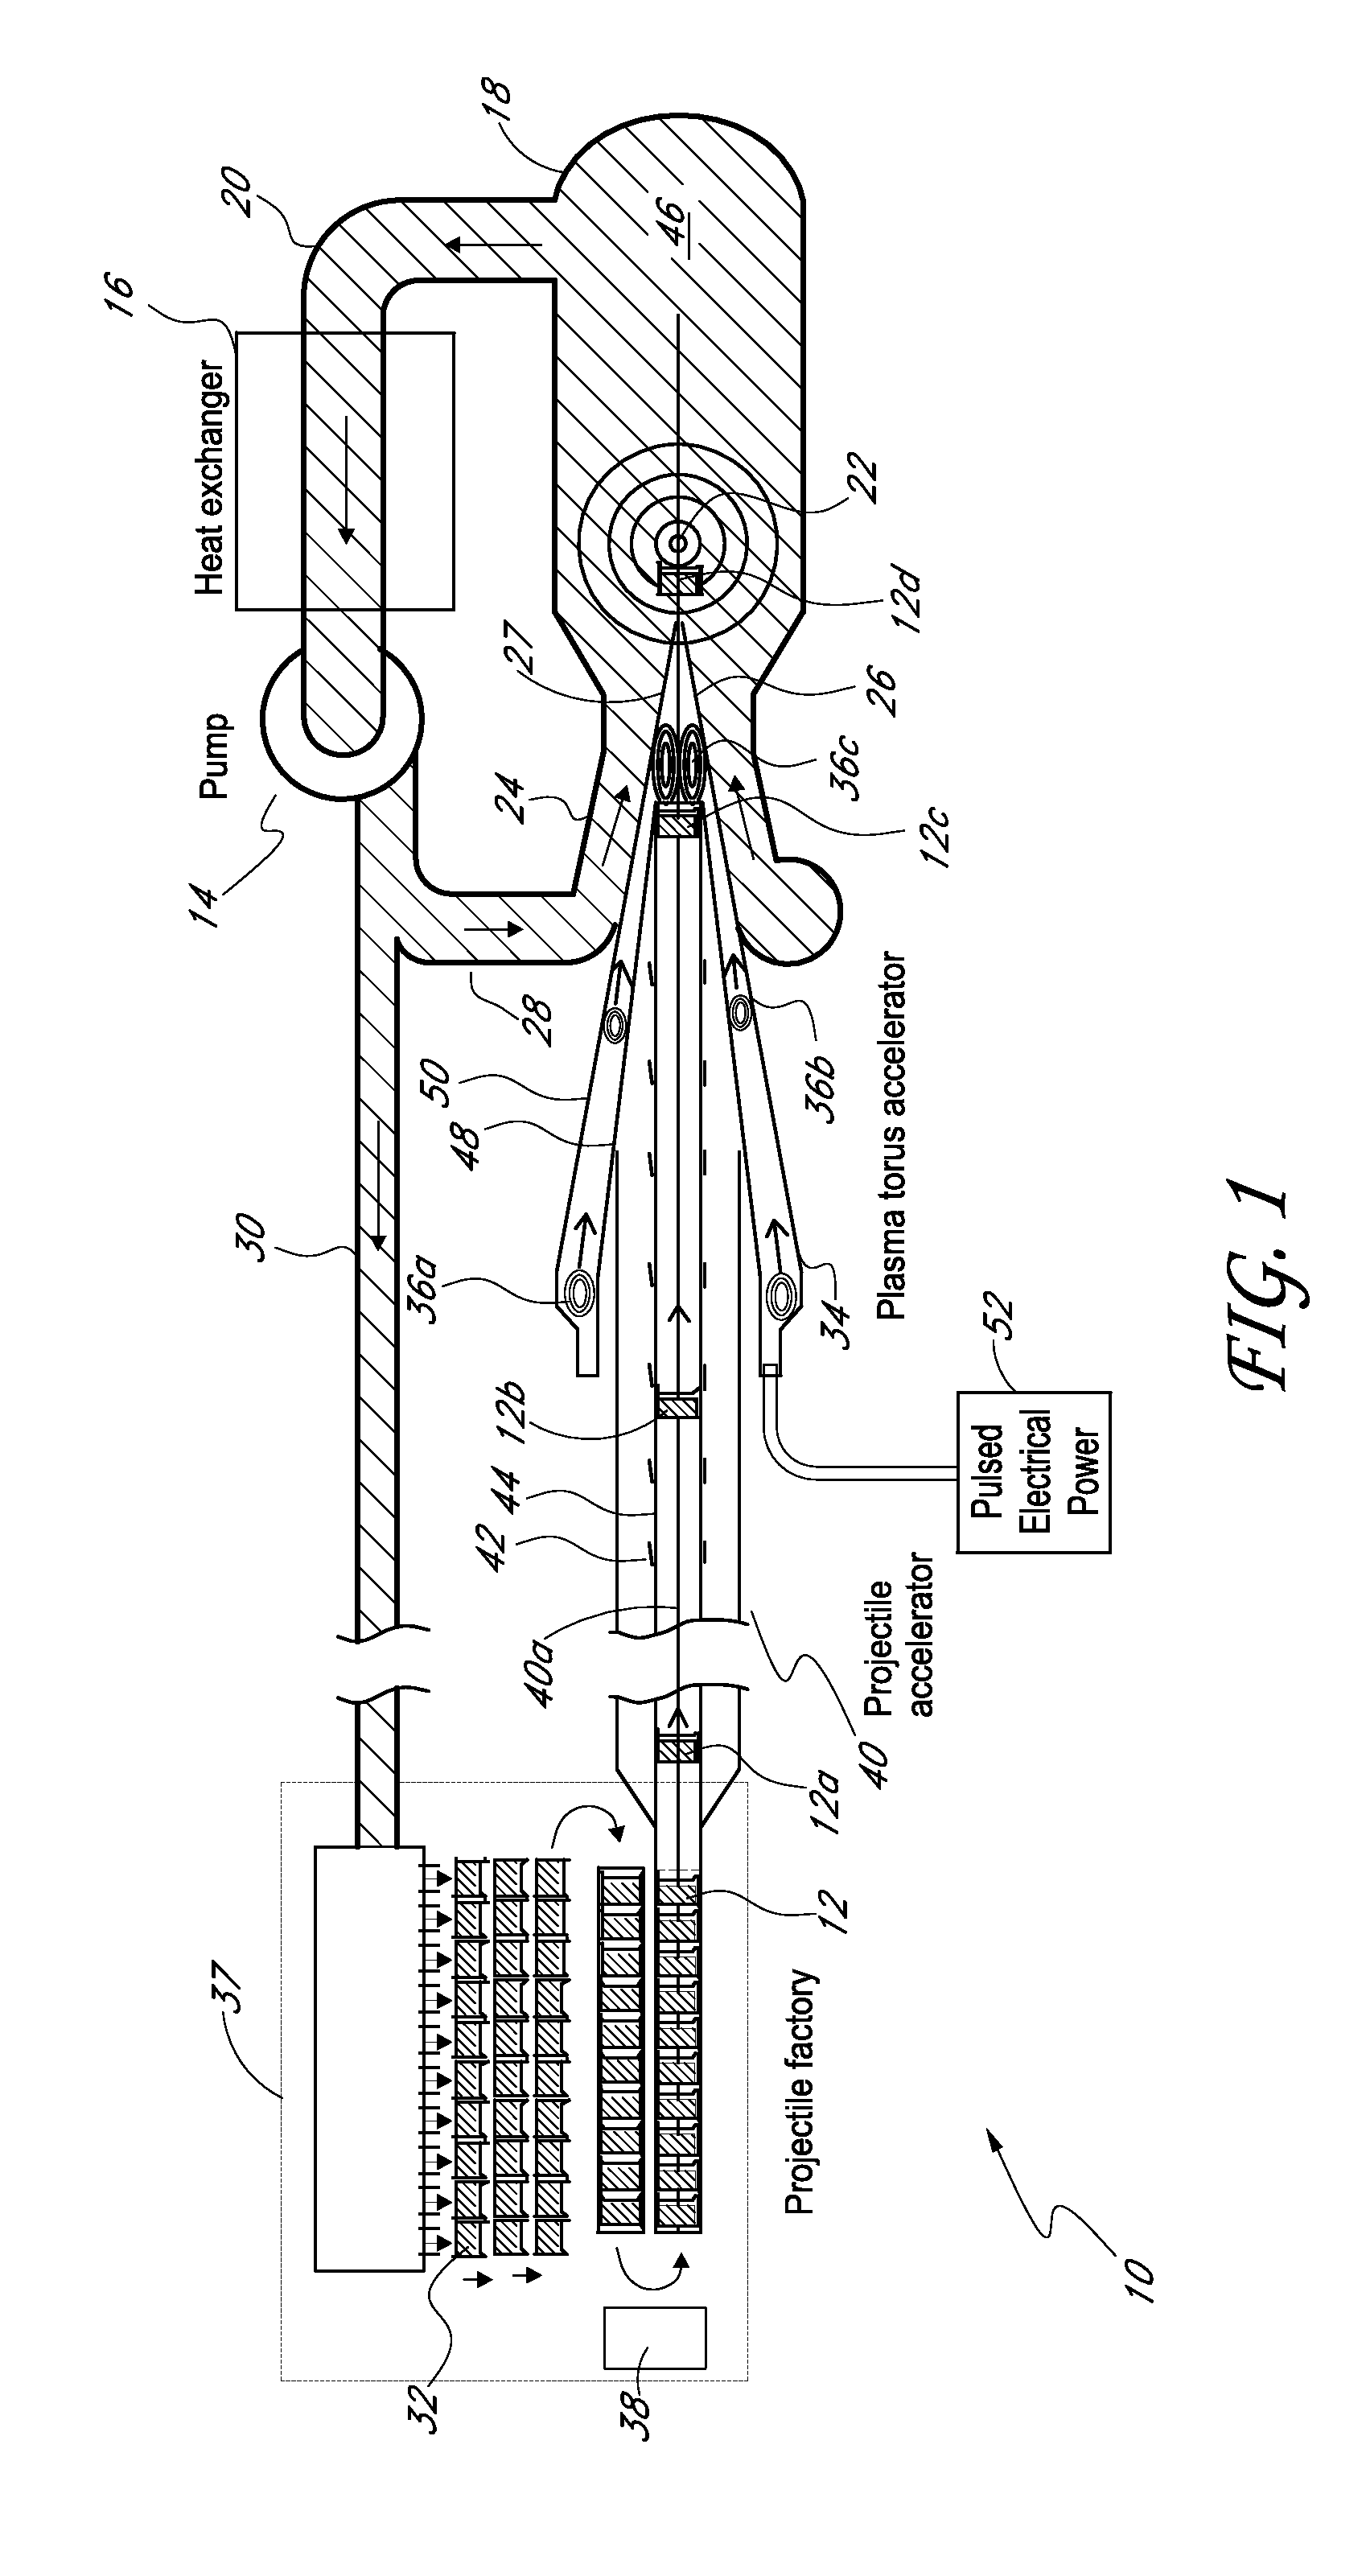 Systems and methods for plasma compression with recycling of projectiles